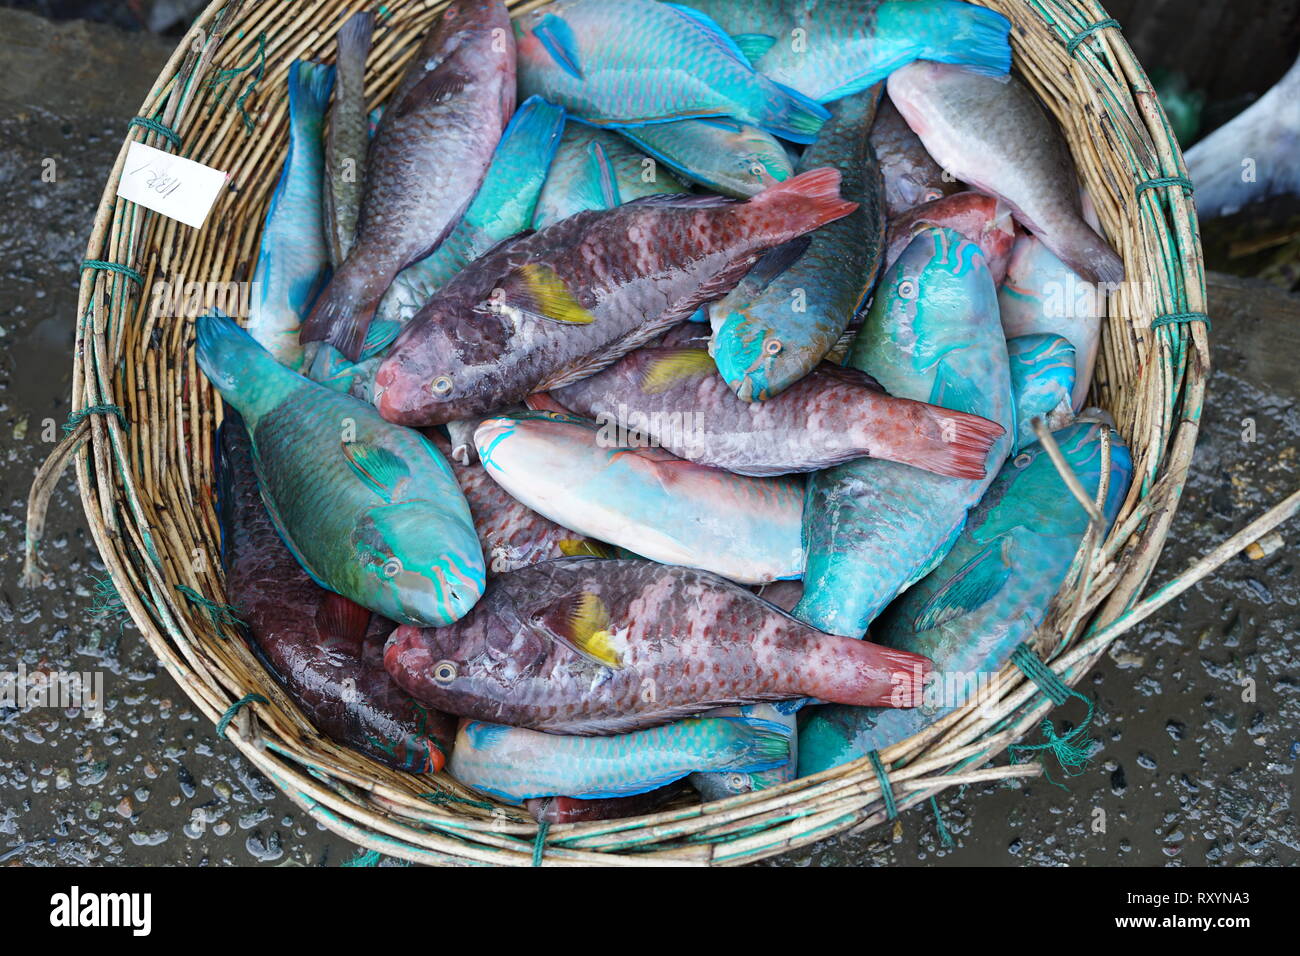 Fresh parrot fish in a wicker basket for sale at seafood market Stock Photo